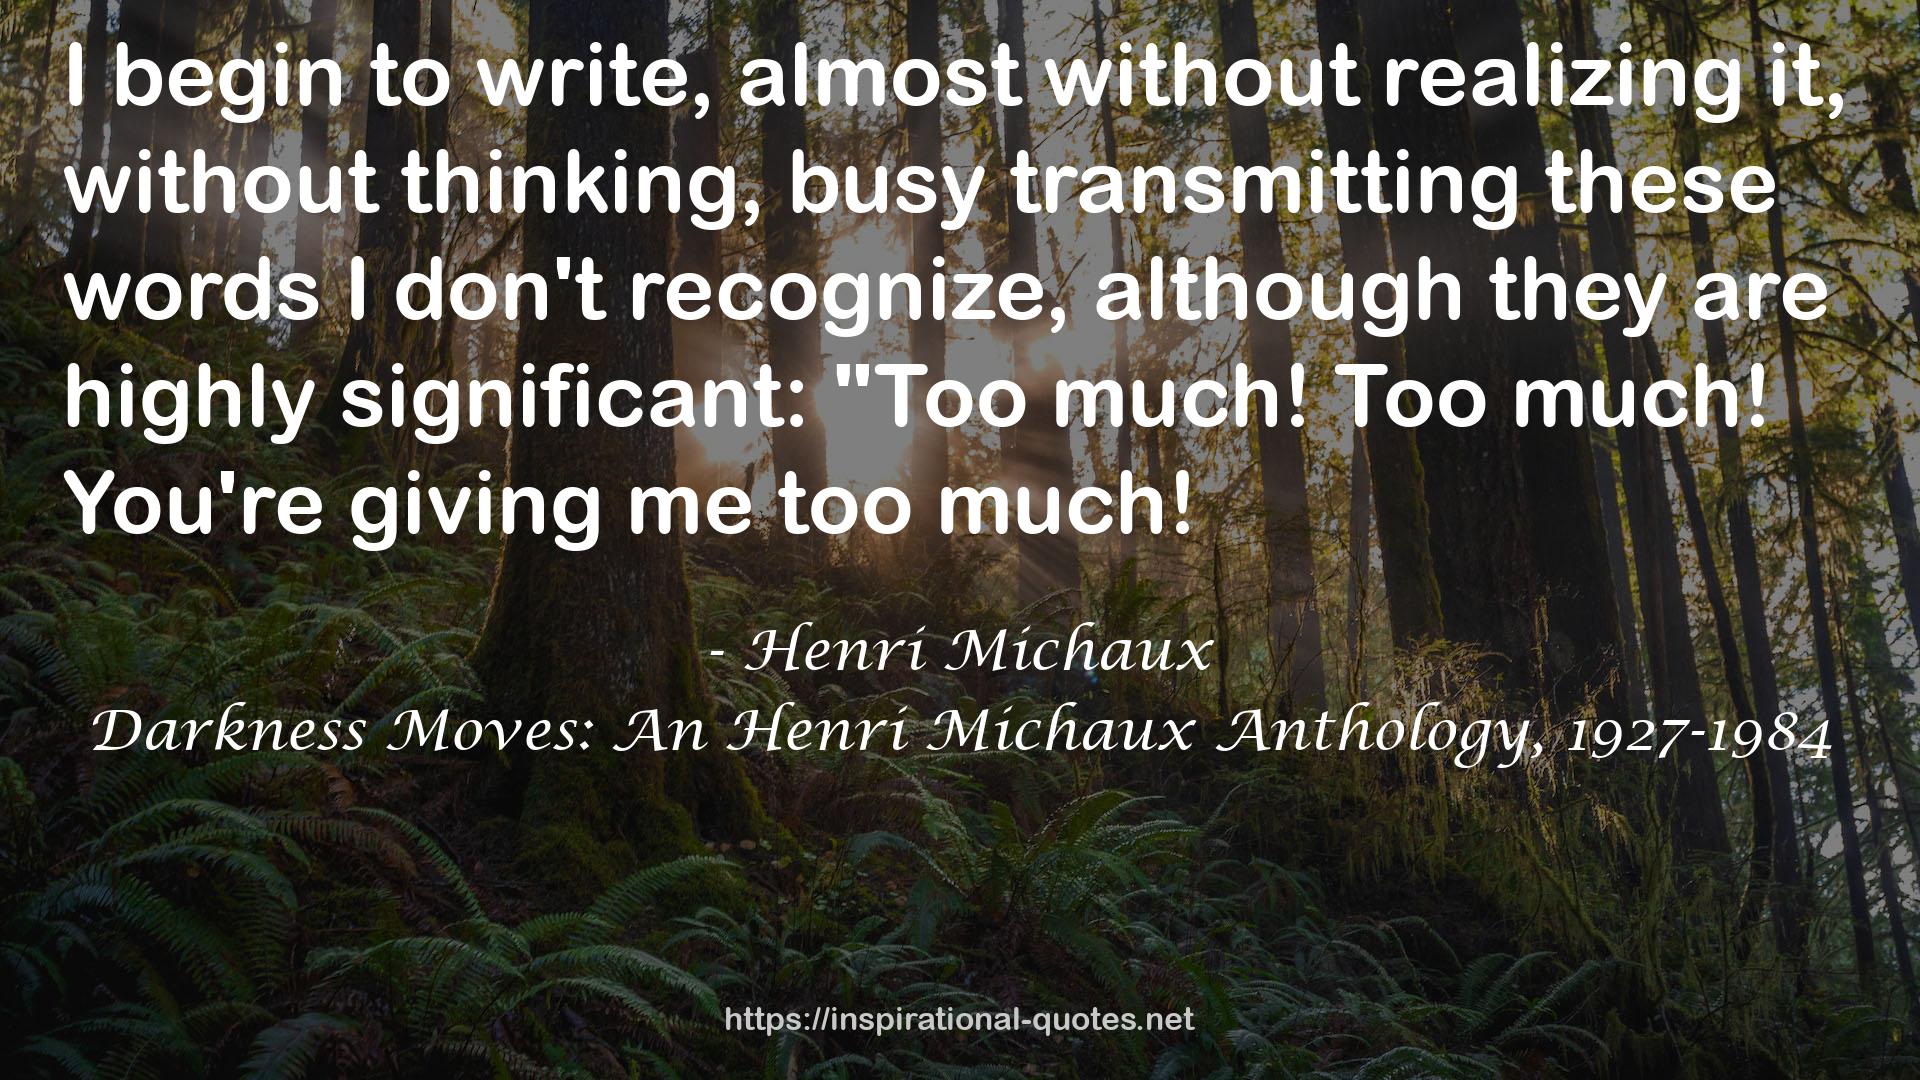 Darkness Moves: An Henri Michaux Anthology, 1927-1984 QUOTES